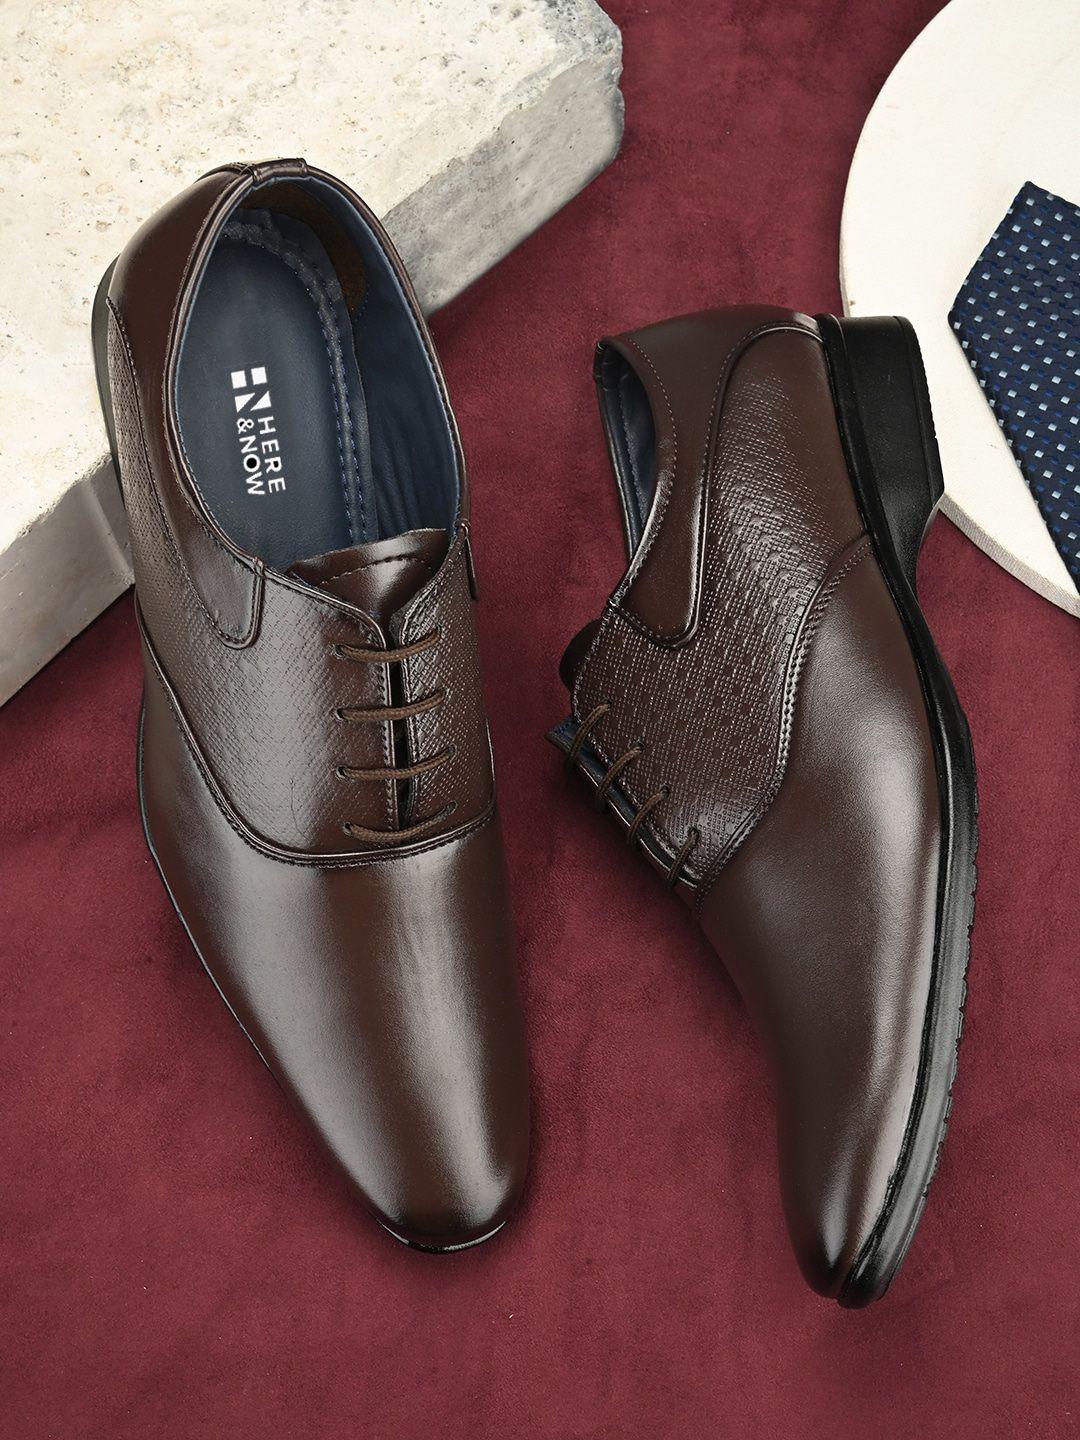 here&now men textured formal oxfords shoes